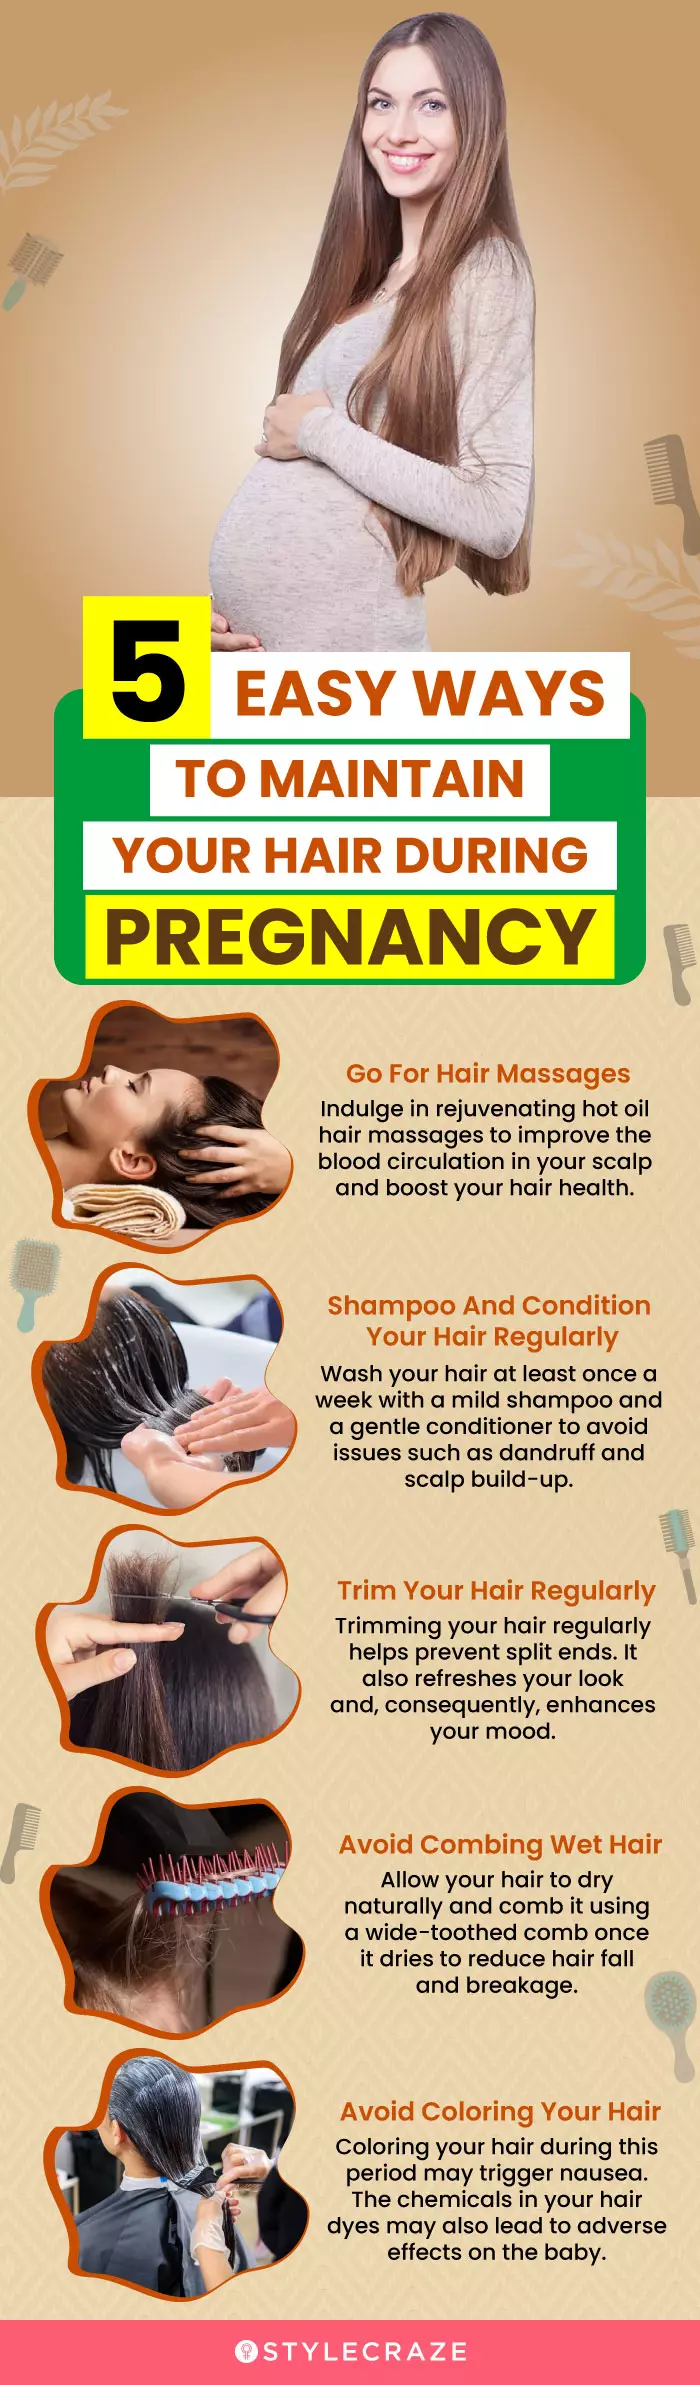 5 easy ways to maintain your hair during pregnancy (infographic)